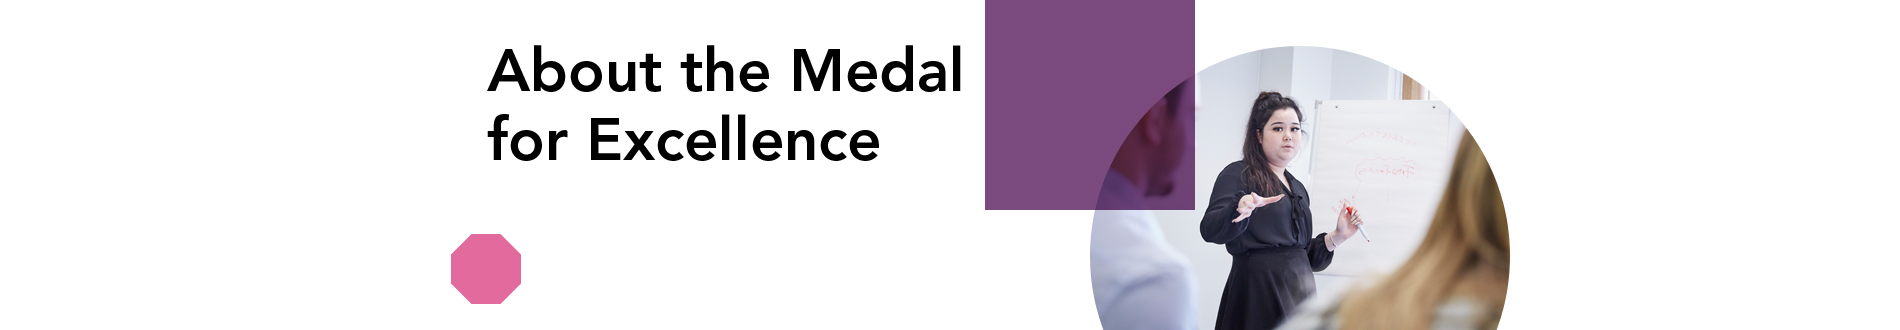 Z_about-the-medal-for-excellence_1900x330 jpg